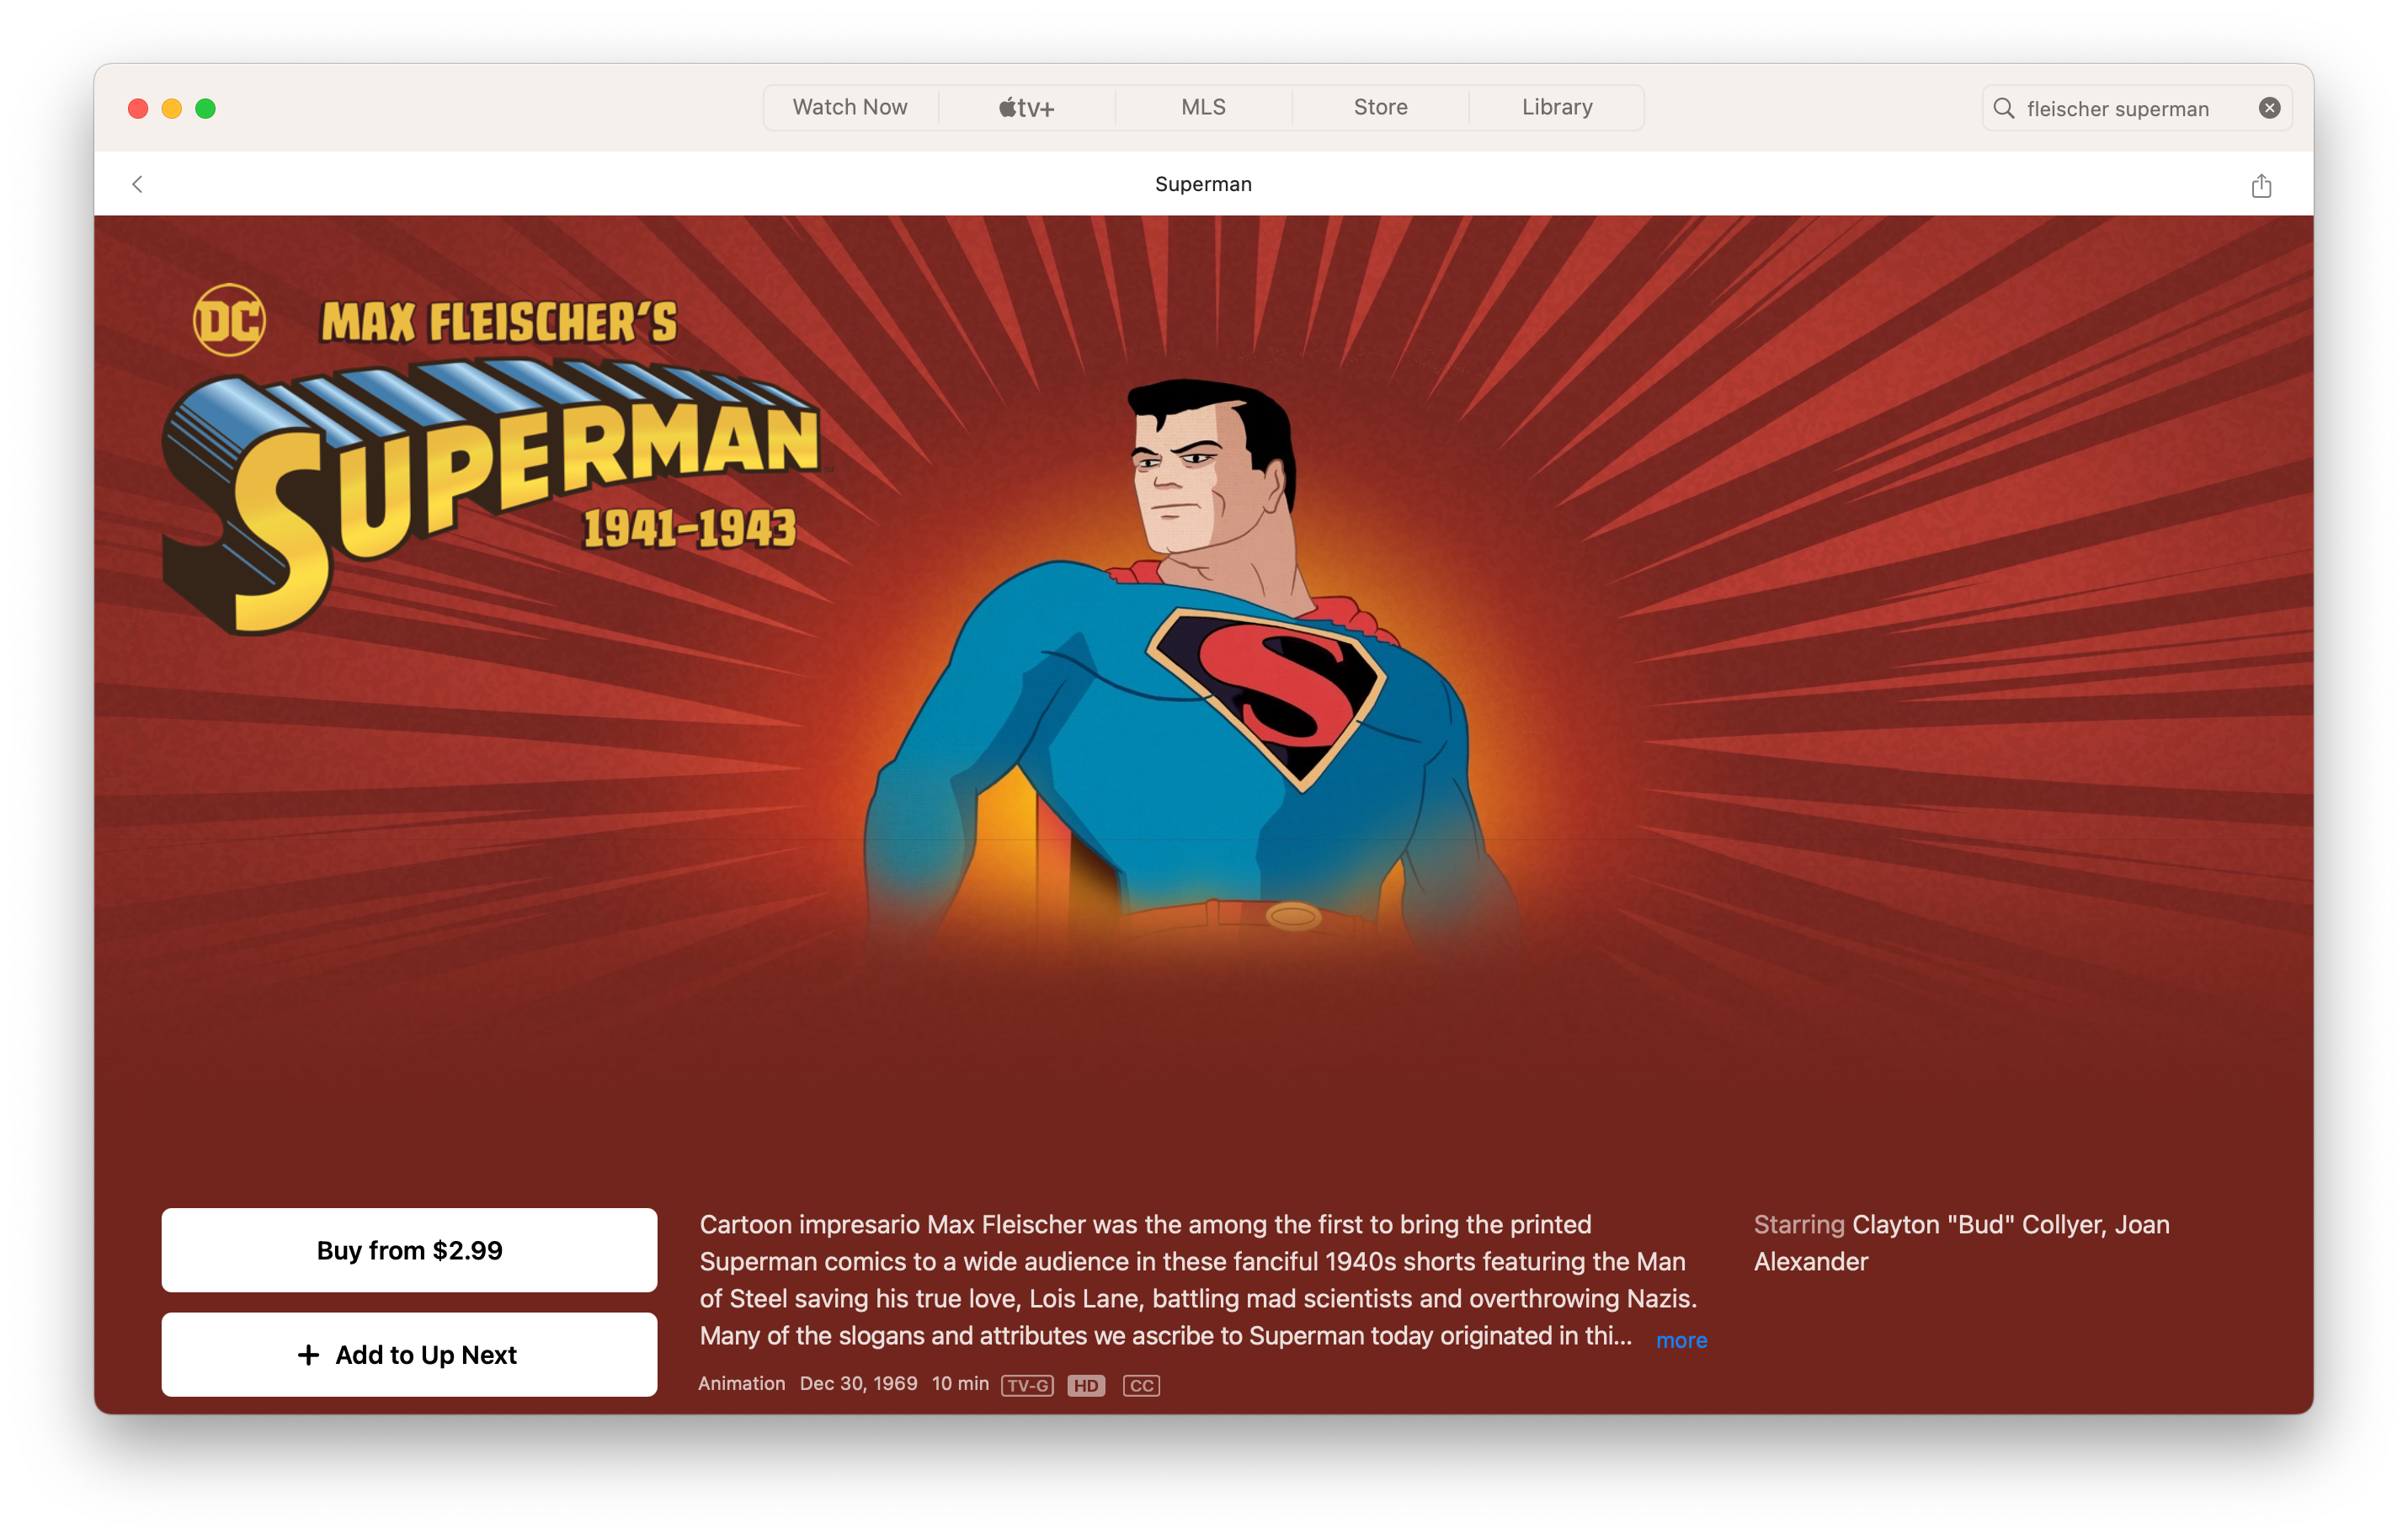 The purchase screen from iTunes of Max Fleischer’s Superman, with a weirdly ugly frame of Superman